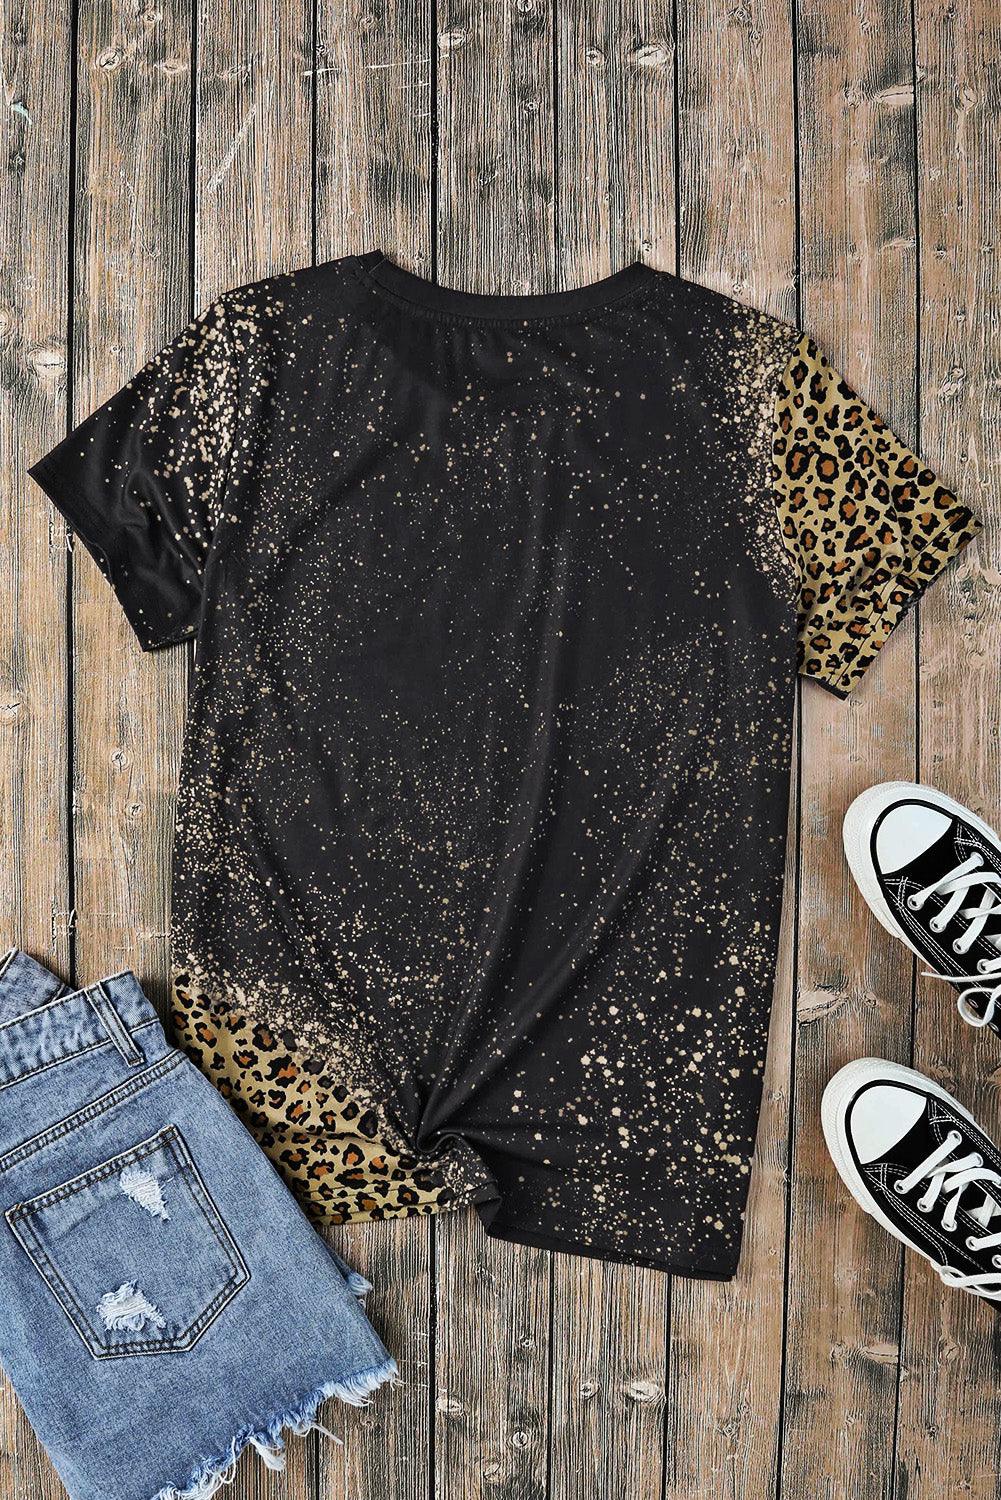 PLAY SOMETHING COUNTRY Graphic Leopard Tee - Lab Fashion, Home & Health